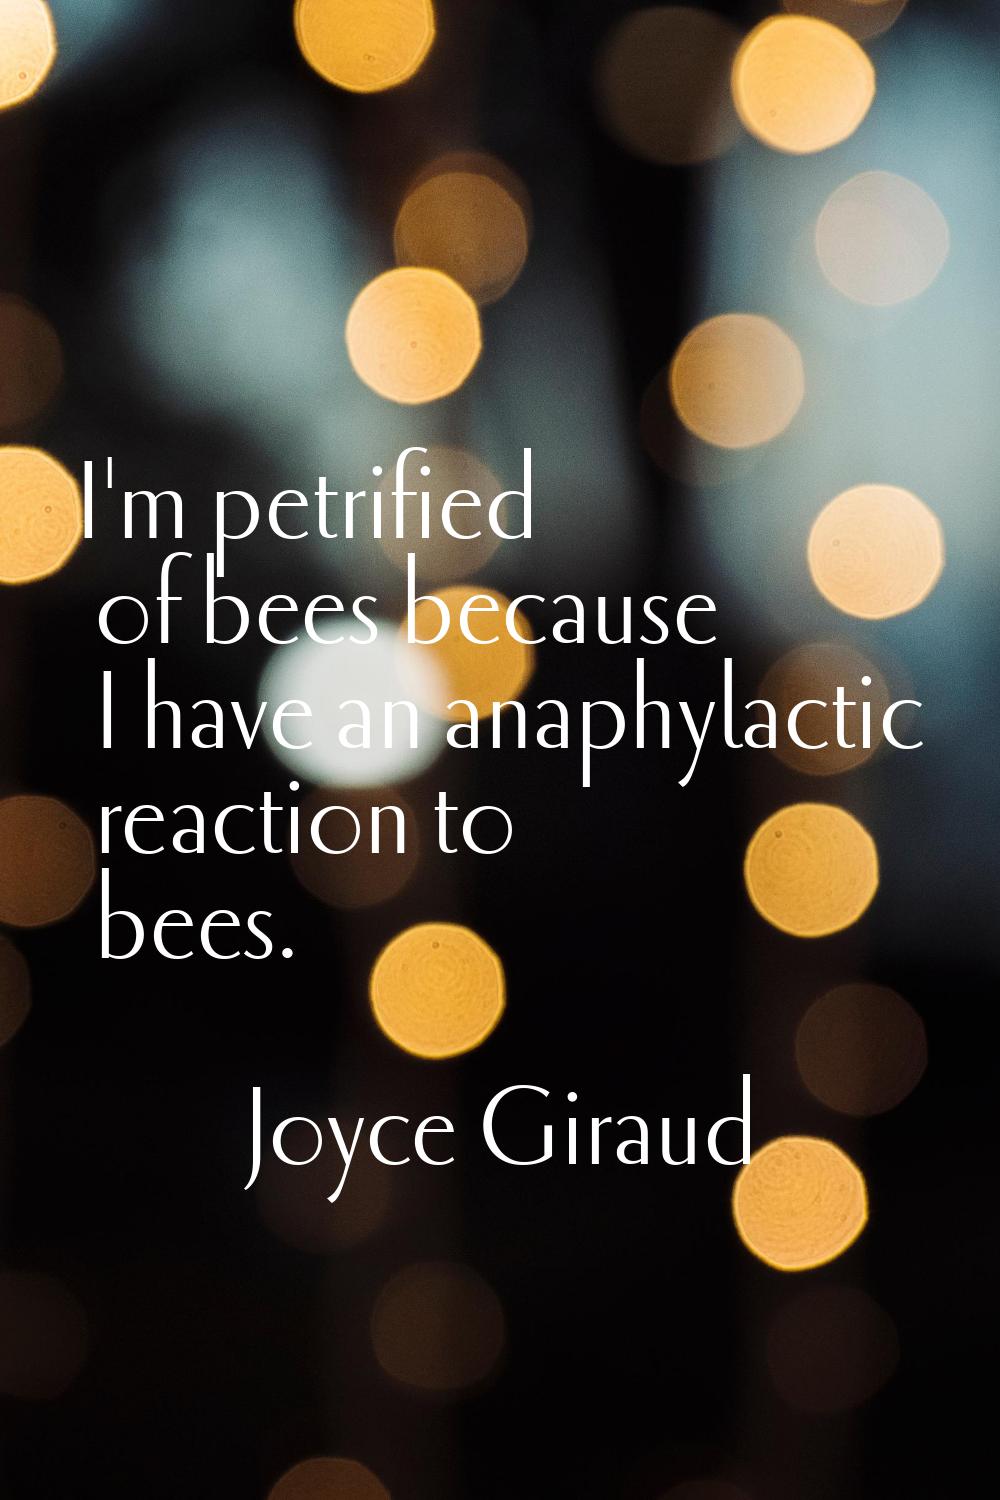 I'm petrified of bees because I have an anaphylactic reaction to bees.